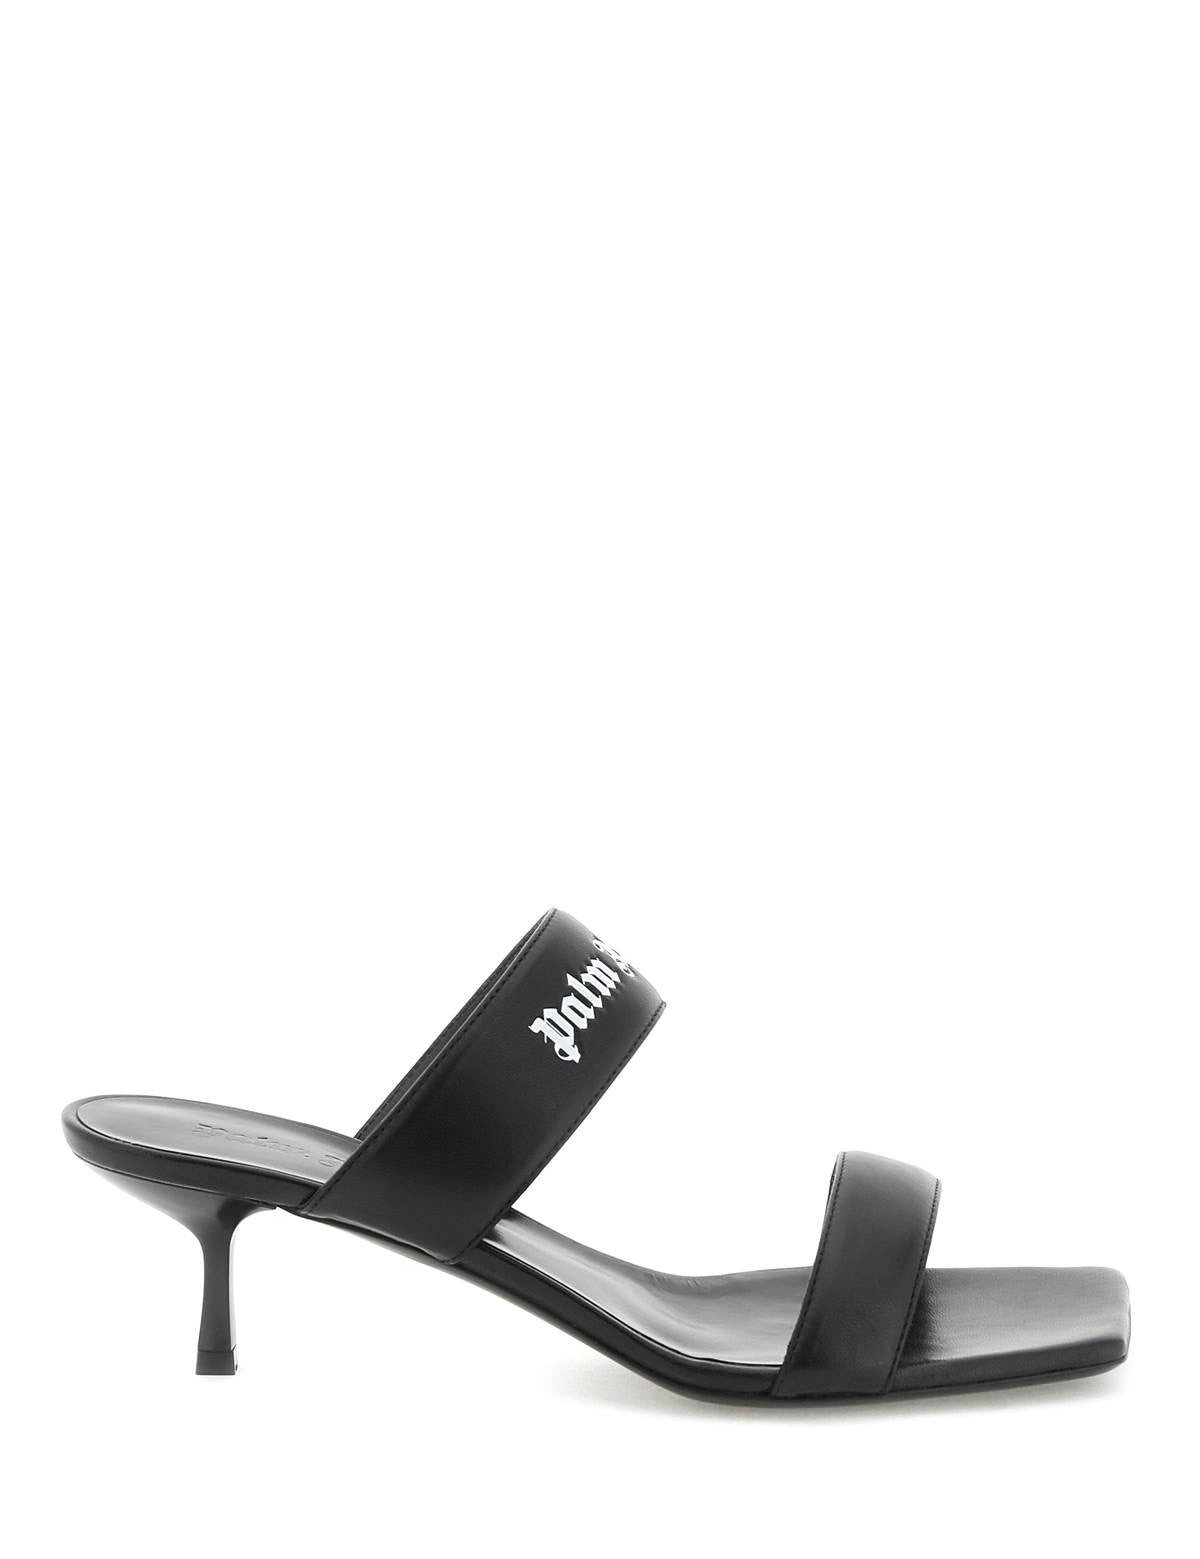 palm-angels-leather-mules-with-logo.jpg